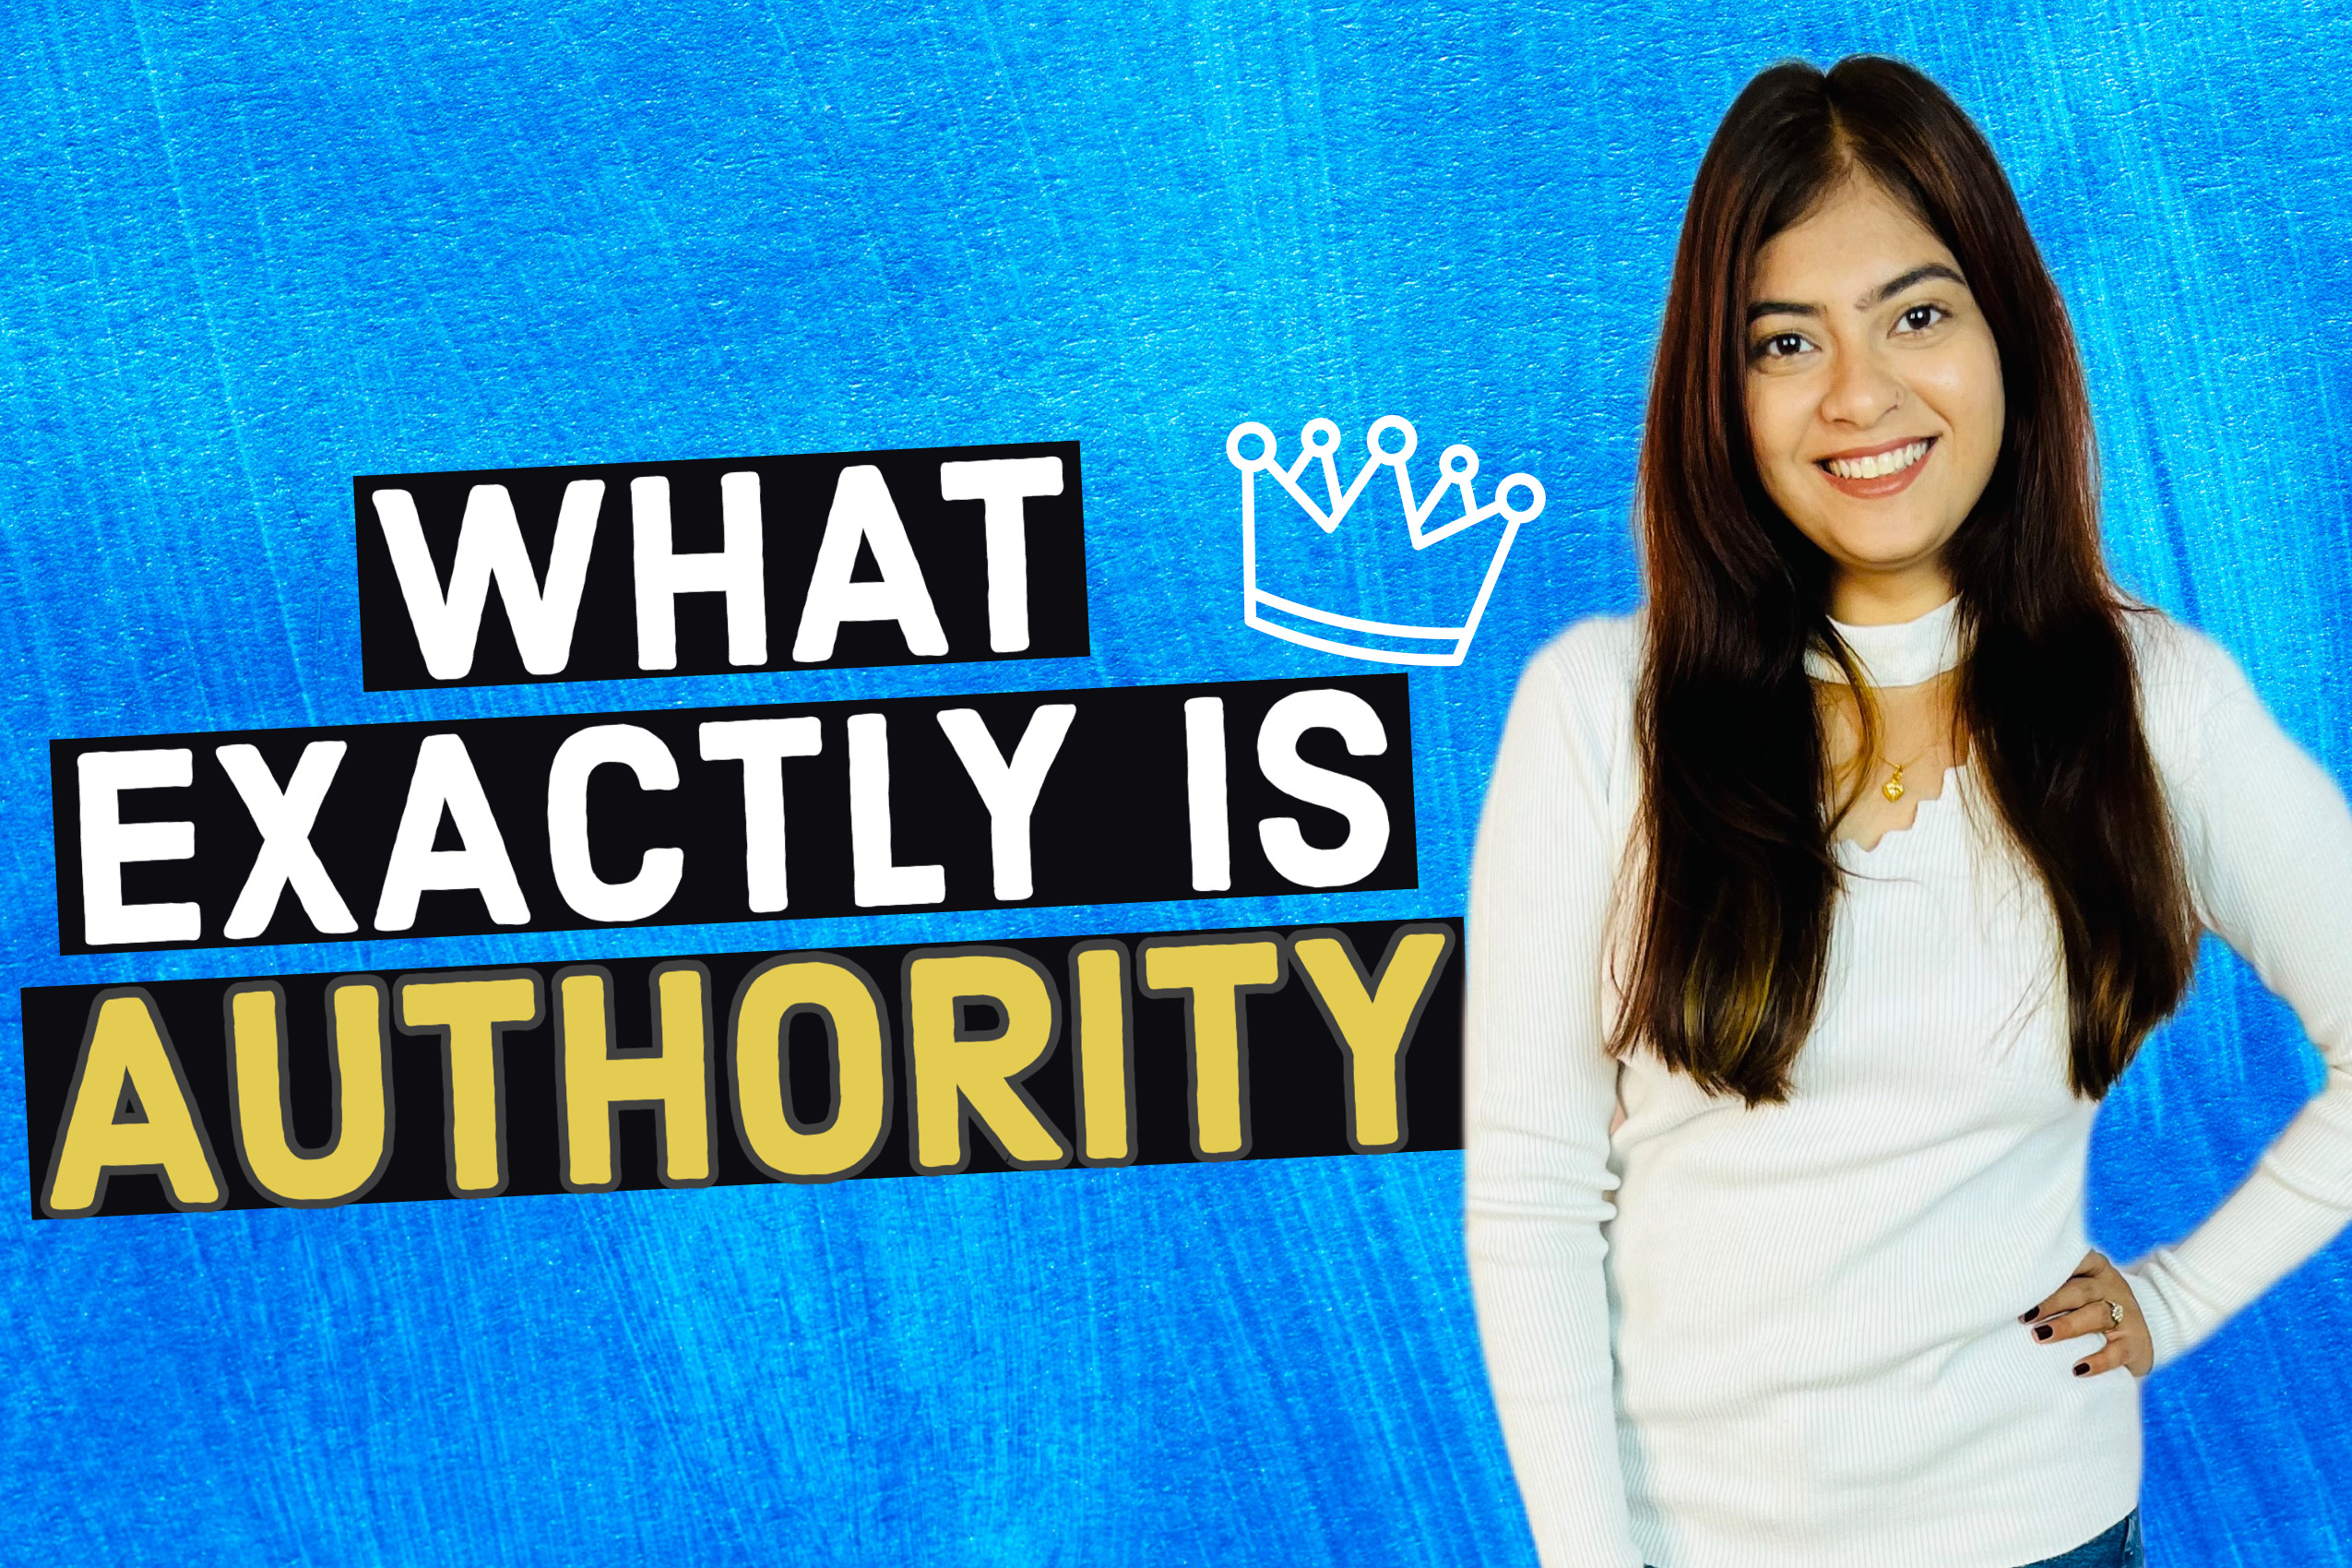 What exactly is Authority?